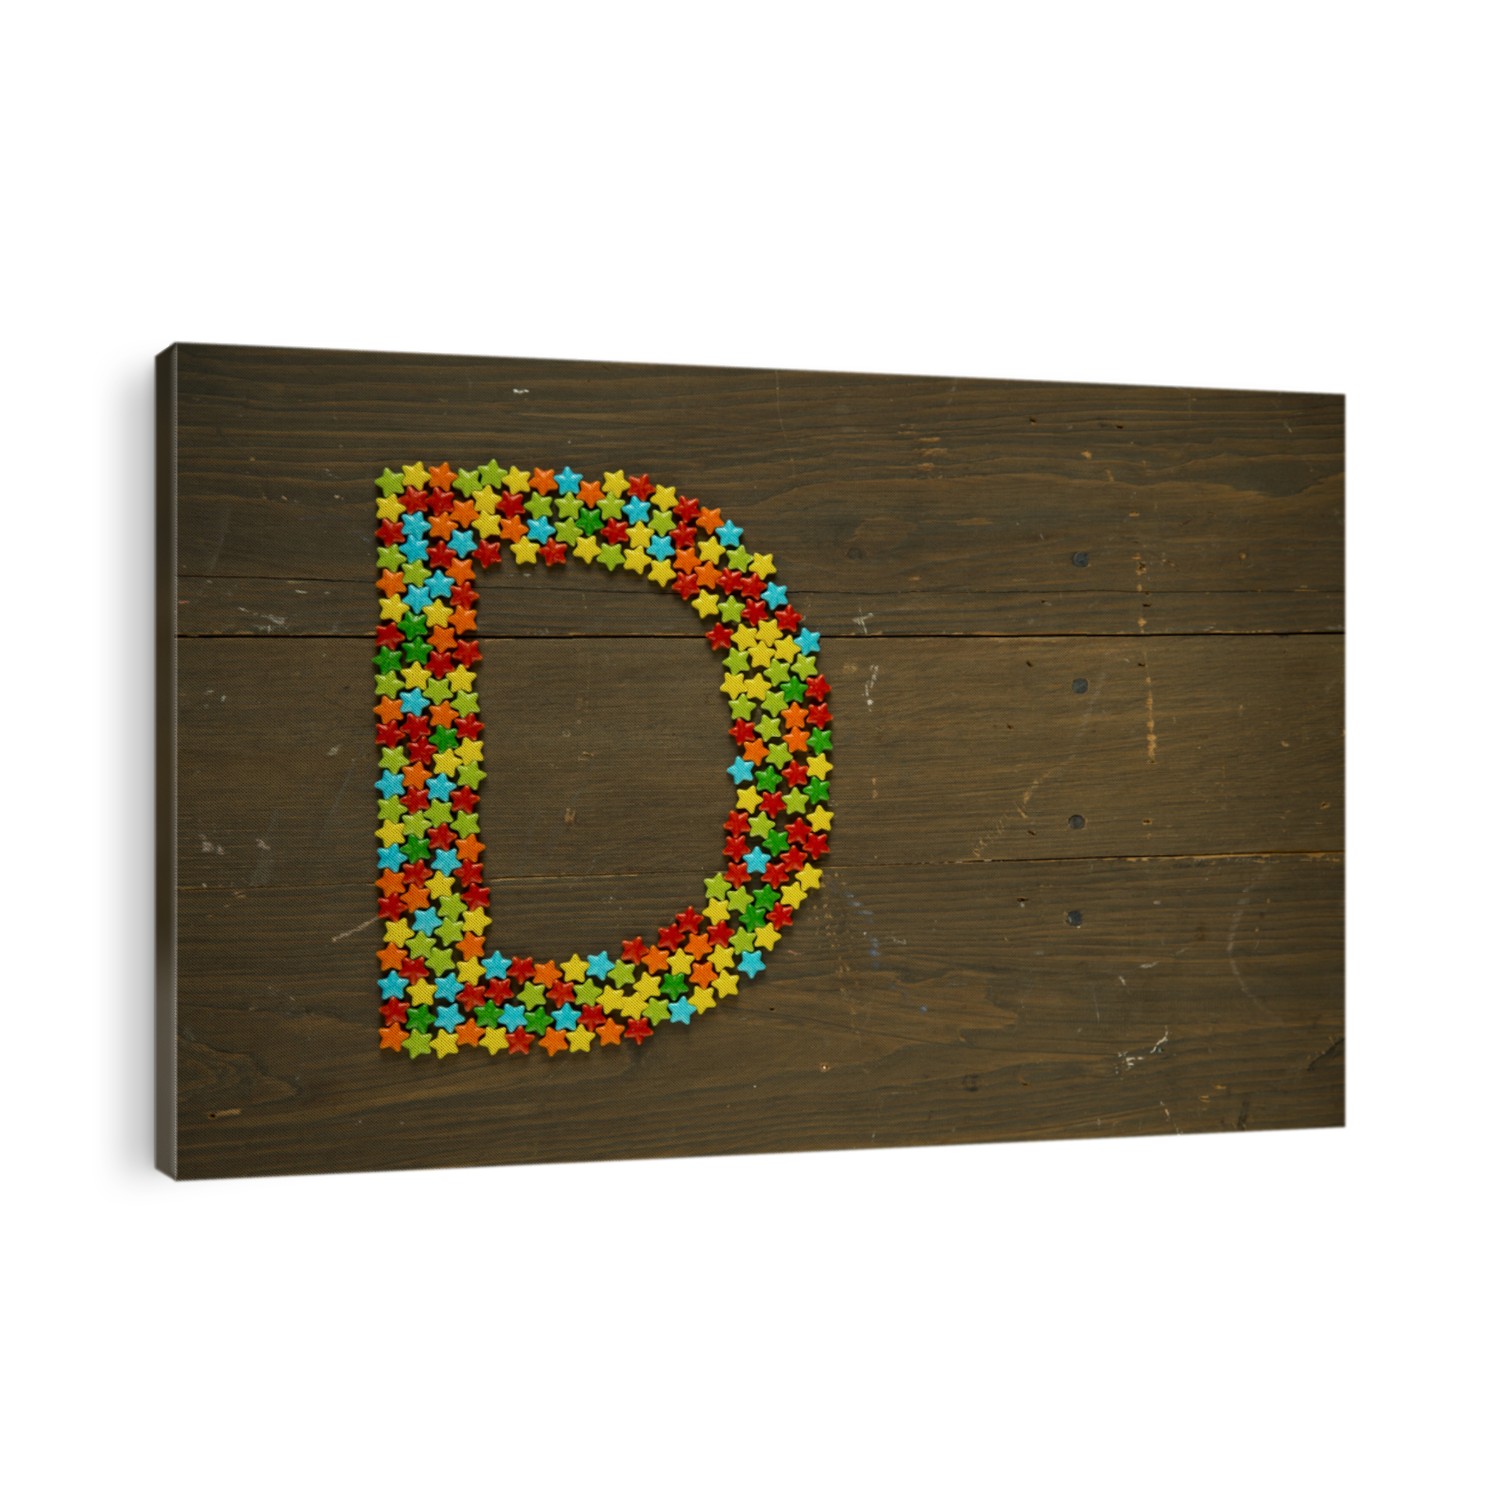 Letter D from alphabet made with star shape candy on a wooden background